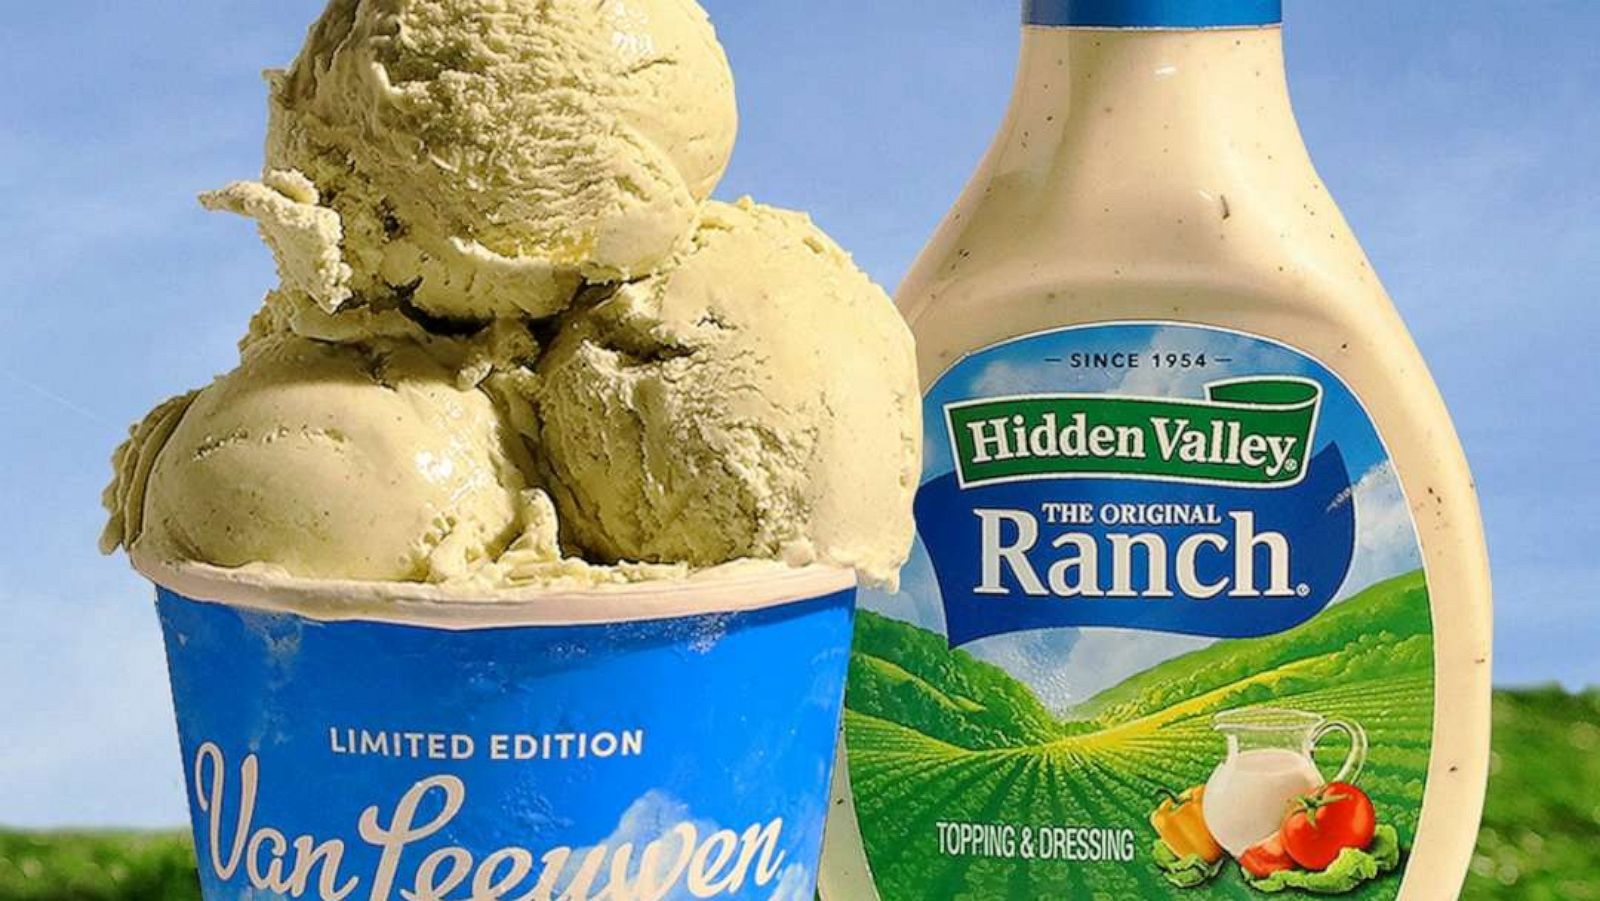 Ranch fans rejoice, there's a new Van Leeuwen, Hidden Valley ice cream  collab for spring - Good Morning America